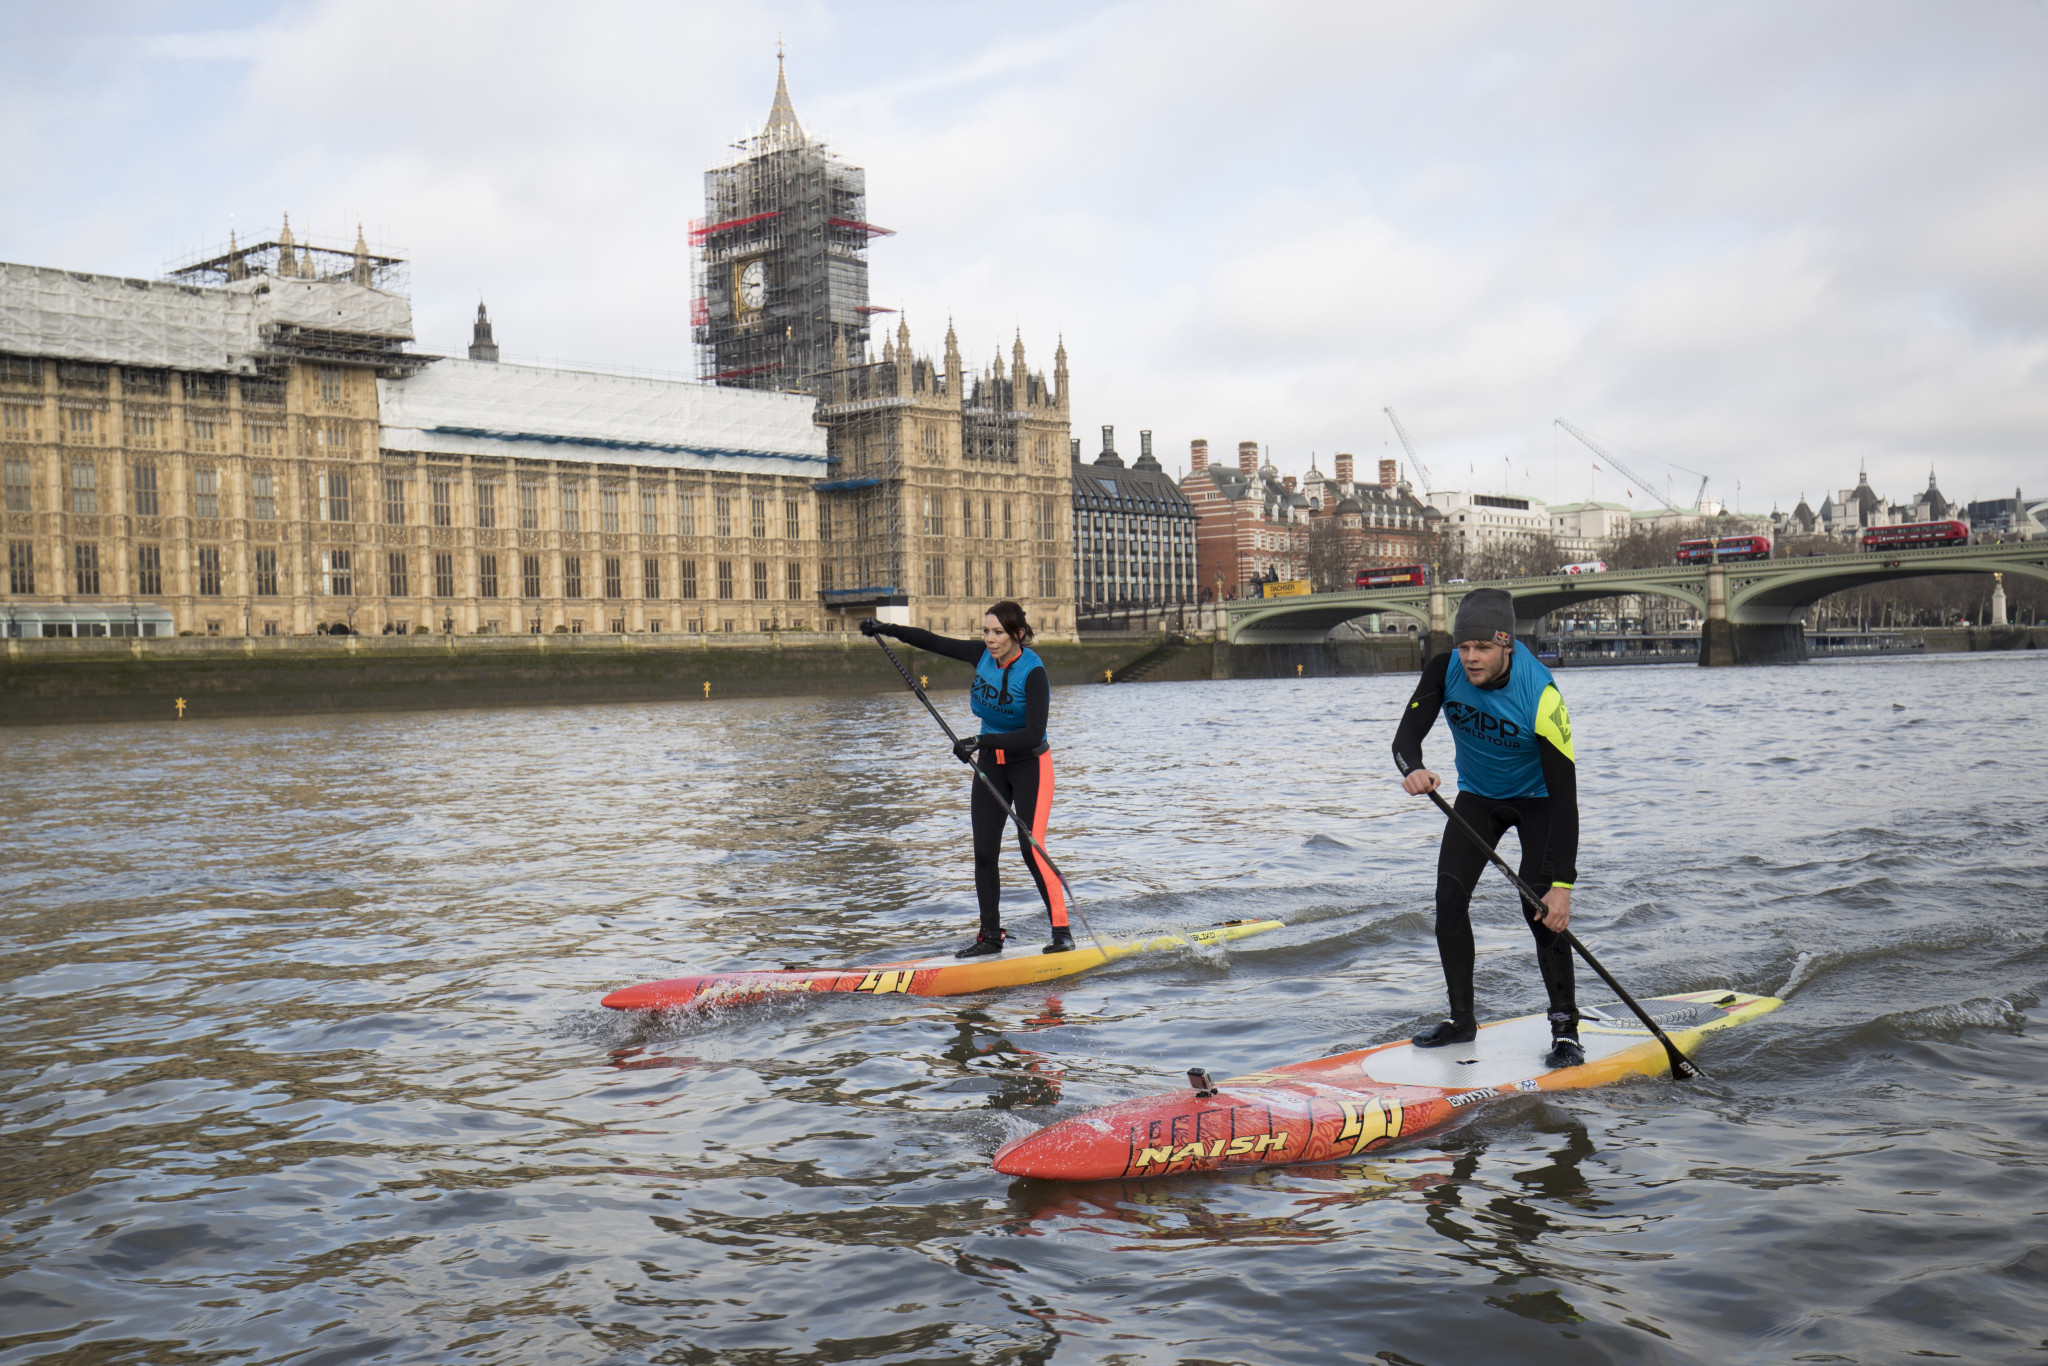 Stand-up row between canoeing and surfing intensifies